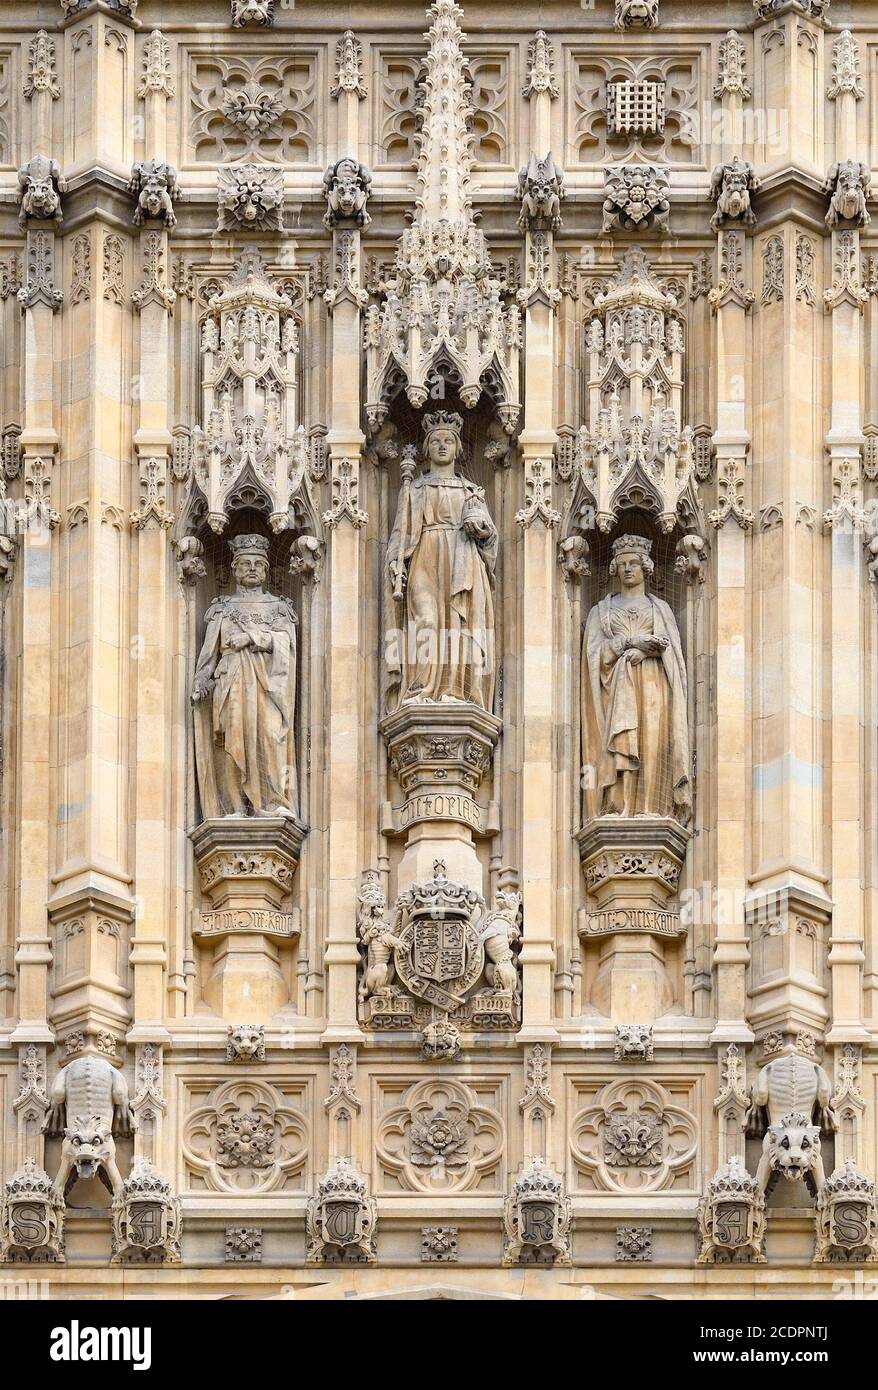 London, England, UK. Statues above the Sovereign's Entrance to the Houses of Parliament under the Victoria Tower. Queen Victoria flanked by her par... Stock Photo